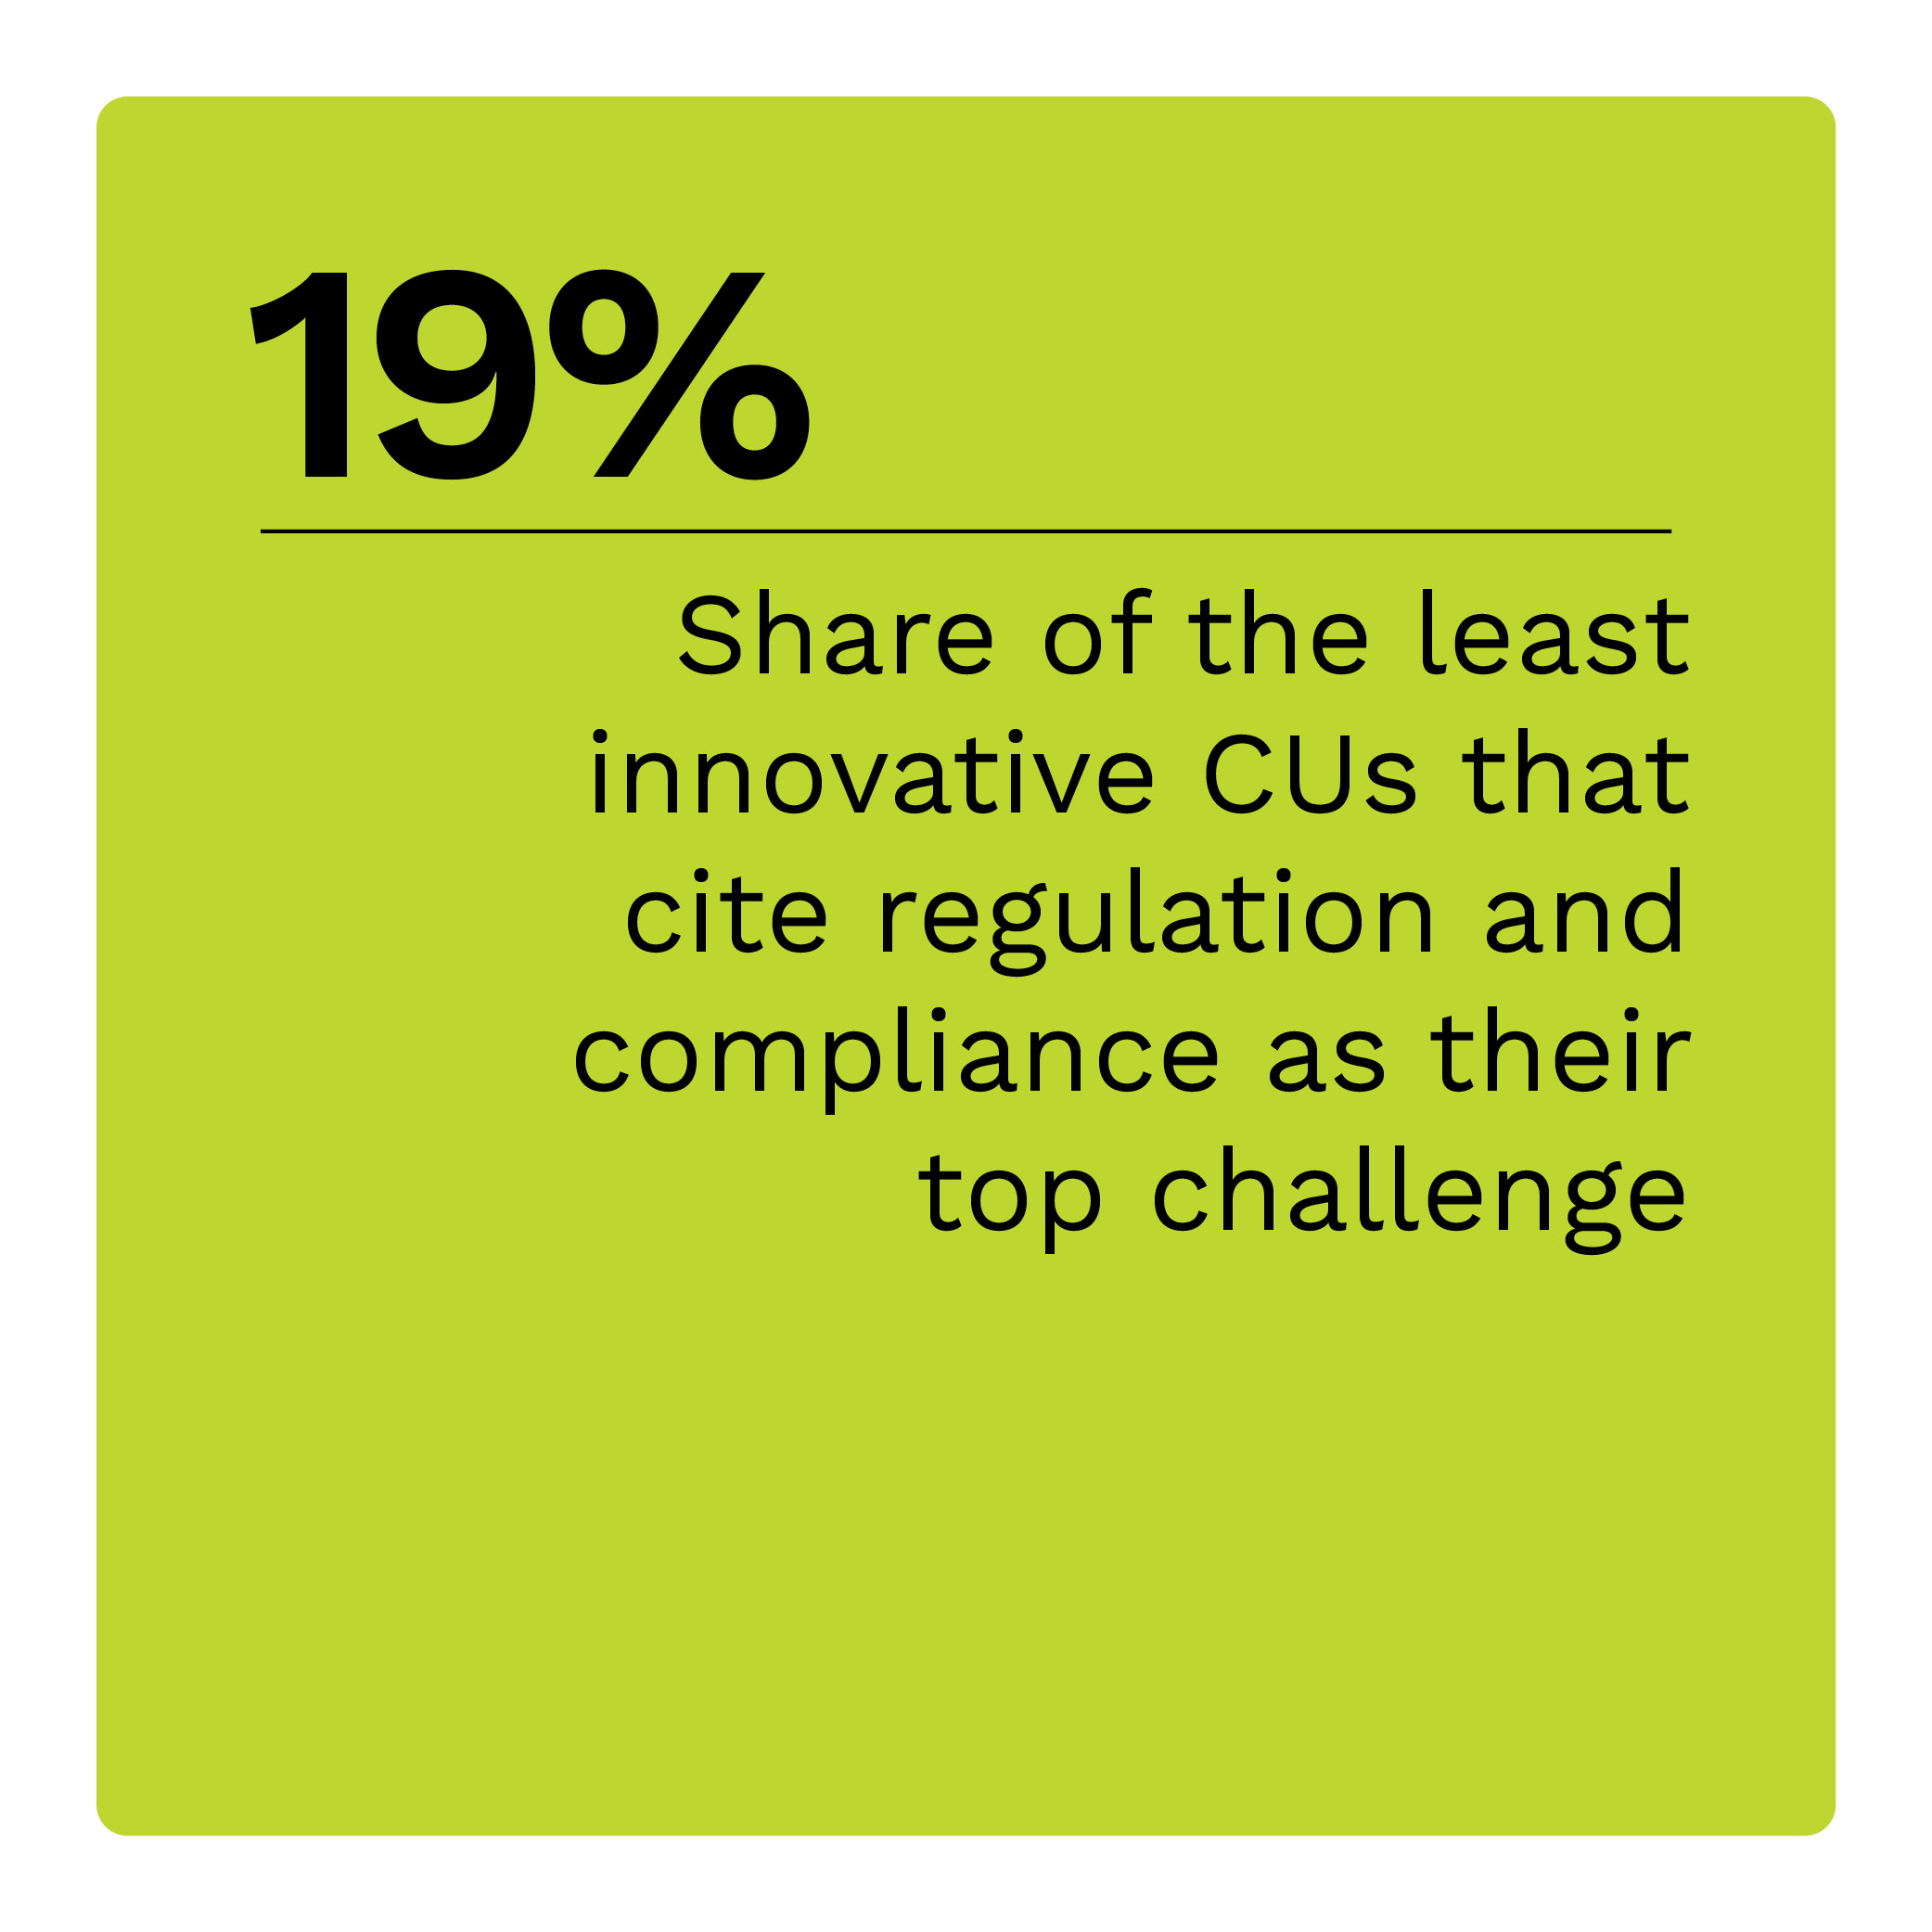 19%: Share of the least innovative CUs that cite regulation and compliance as their top challenge